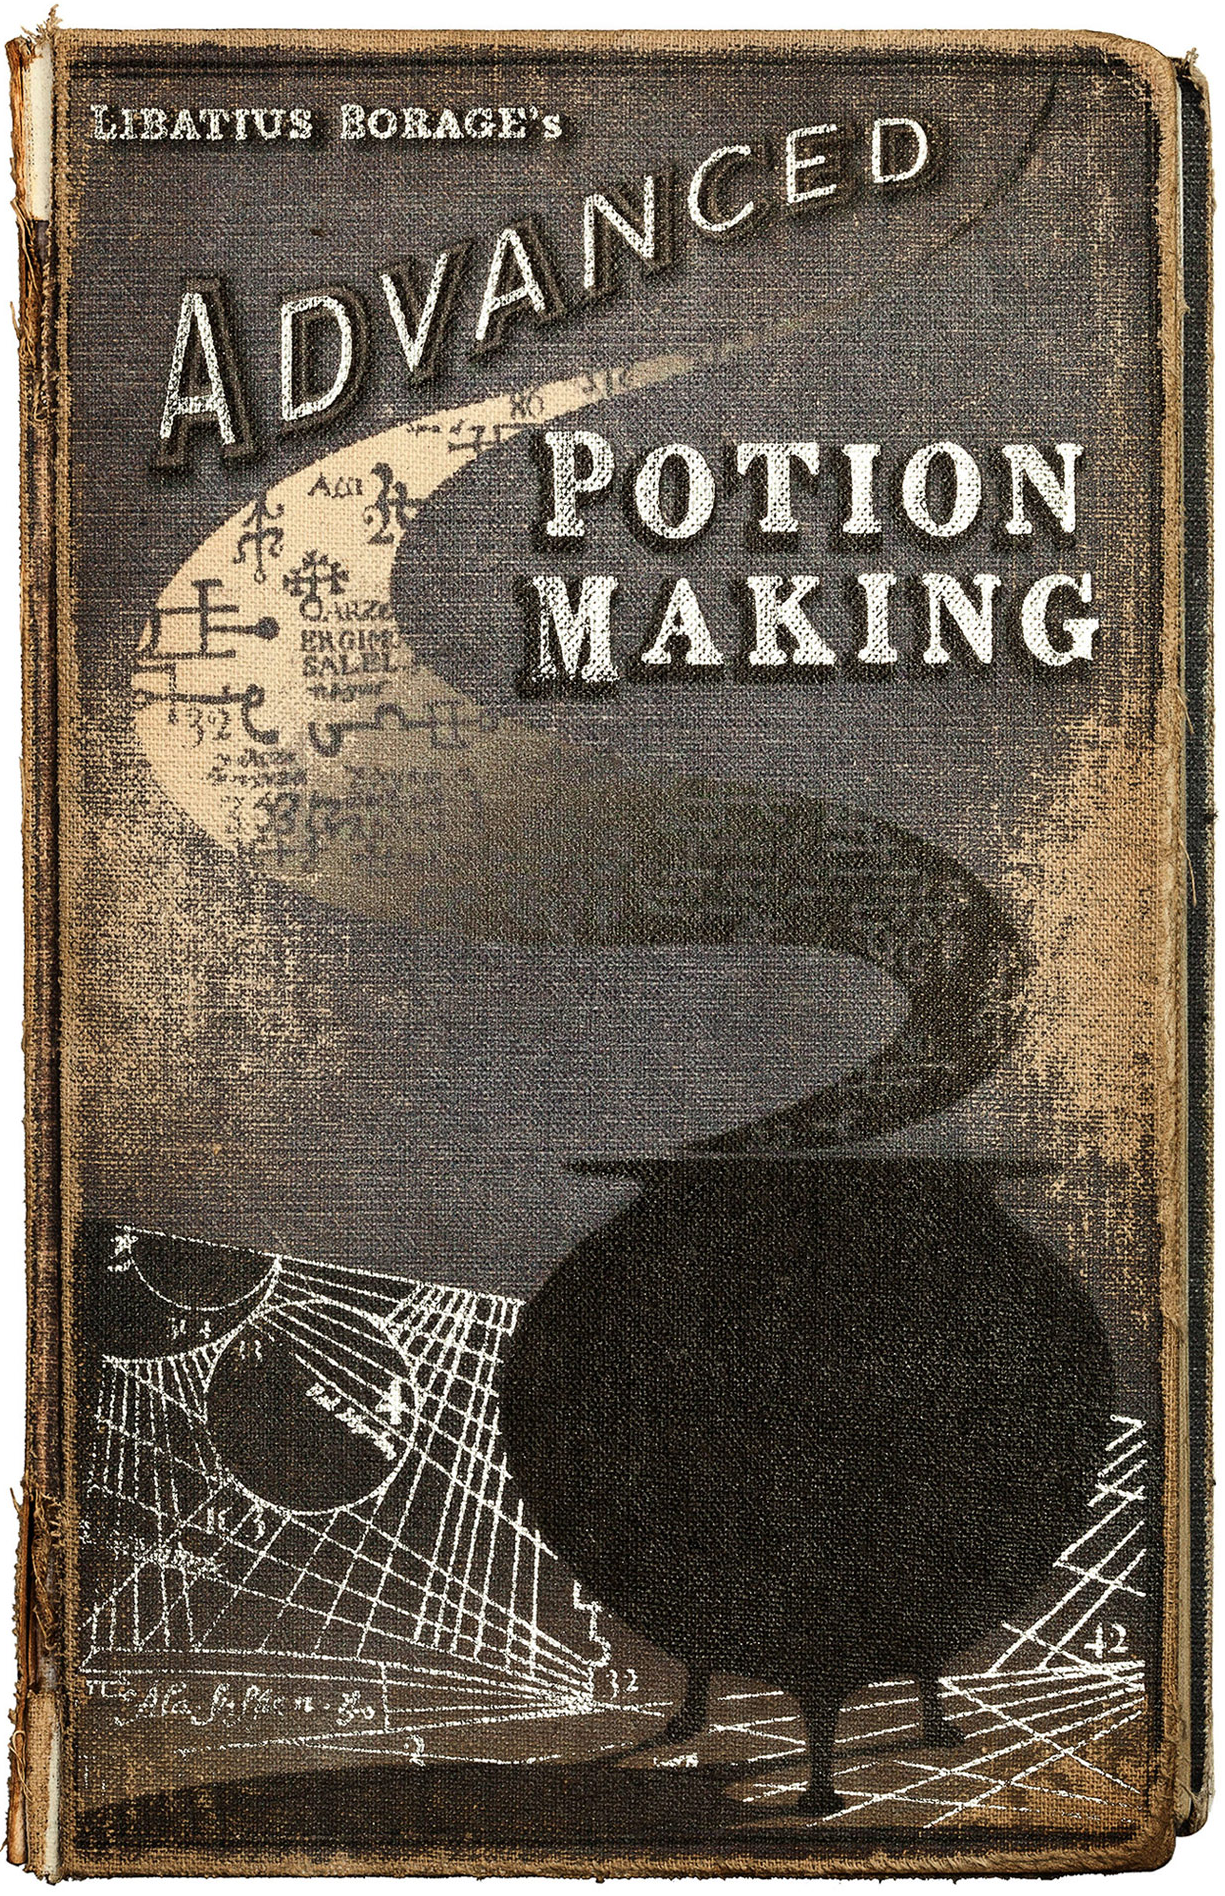 harry potter advanced potion making book